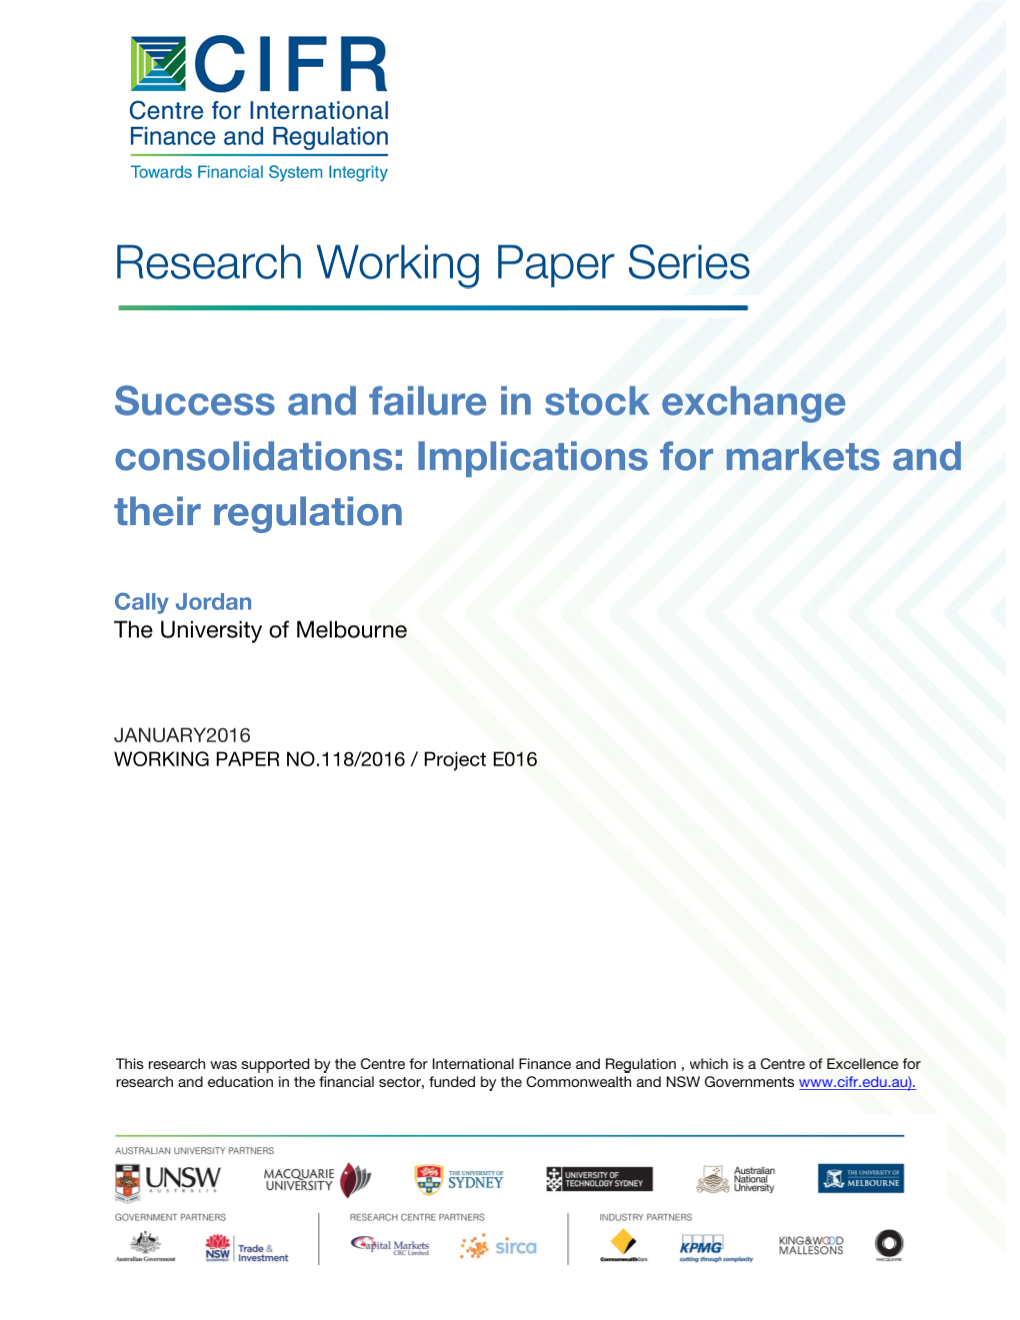 Success and Failure in Stock Exchange Consolidations: Implications for Markets and Their Regulation